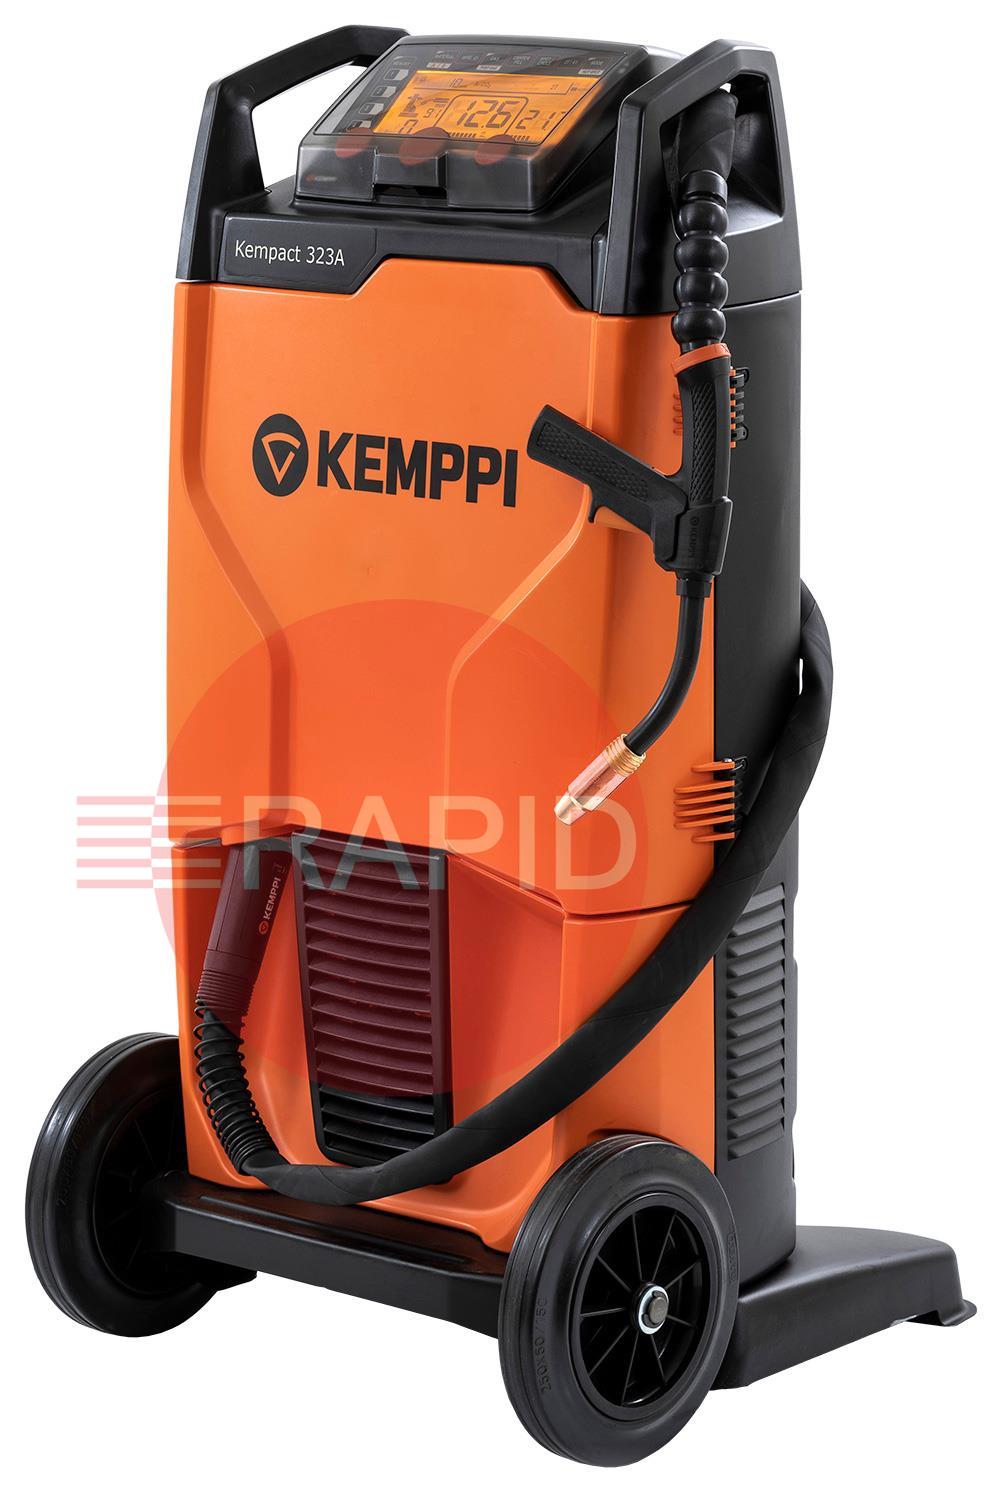 P2213GXE  Kemppi Kempact RA 323A, 320A 3 Phase 400v MIG Welder, with Flexlite GXe 405G 3.5m Torch